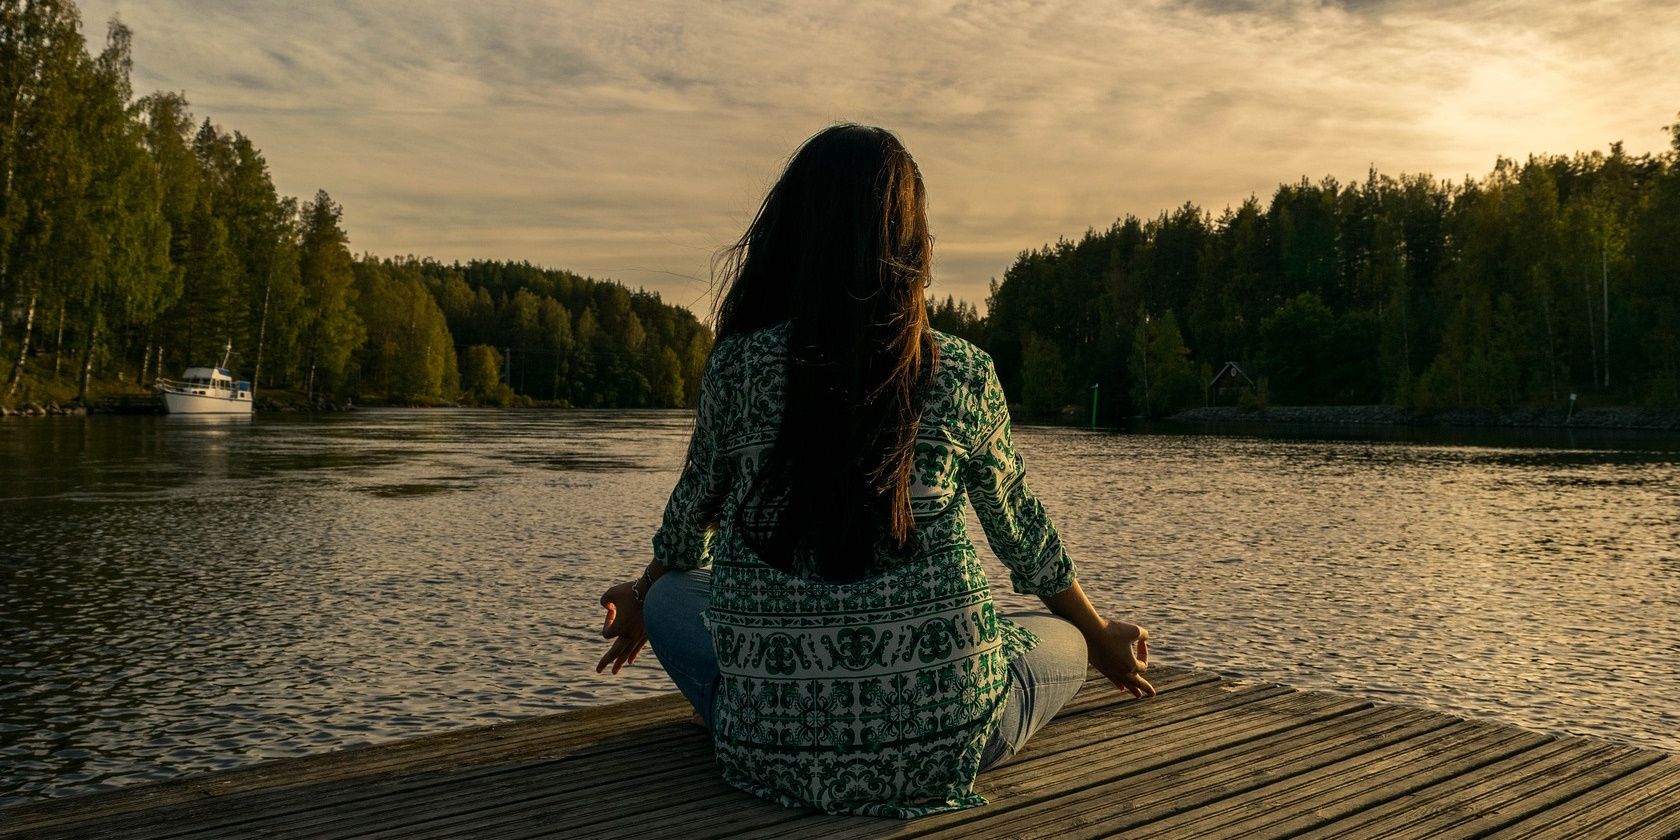 How to Get Started With Meditation